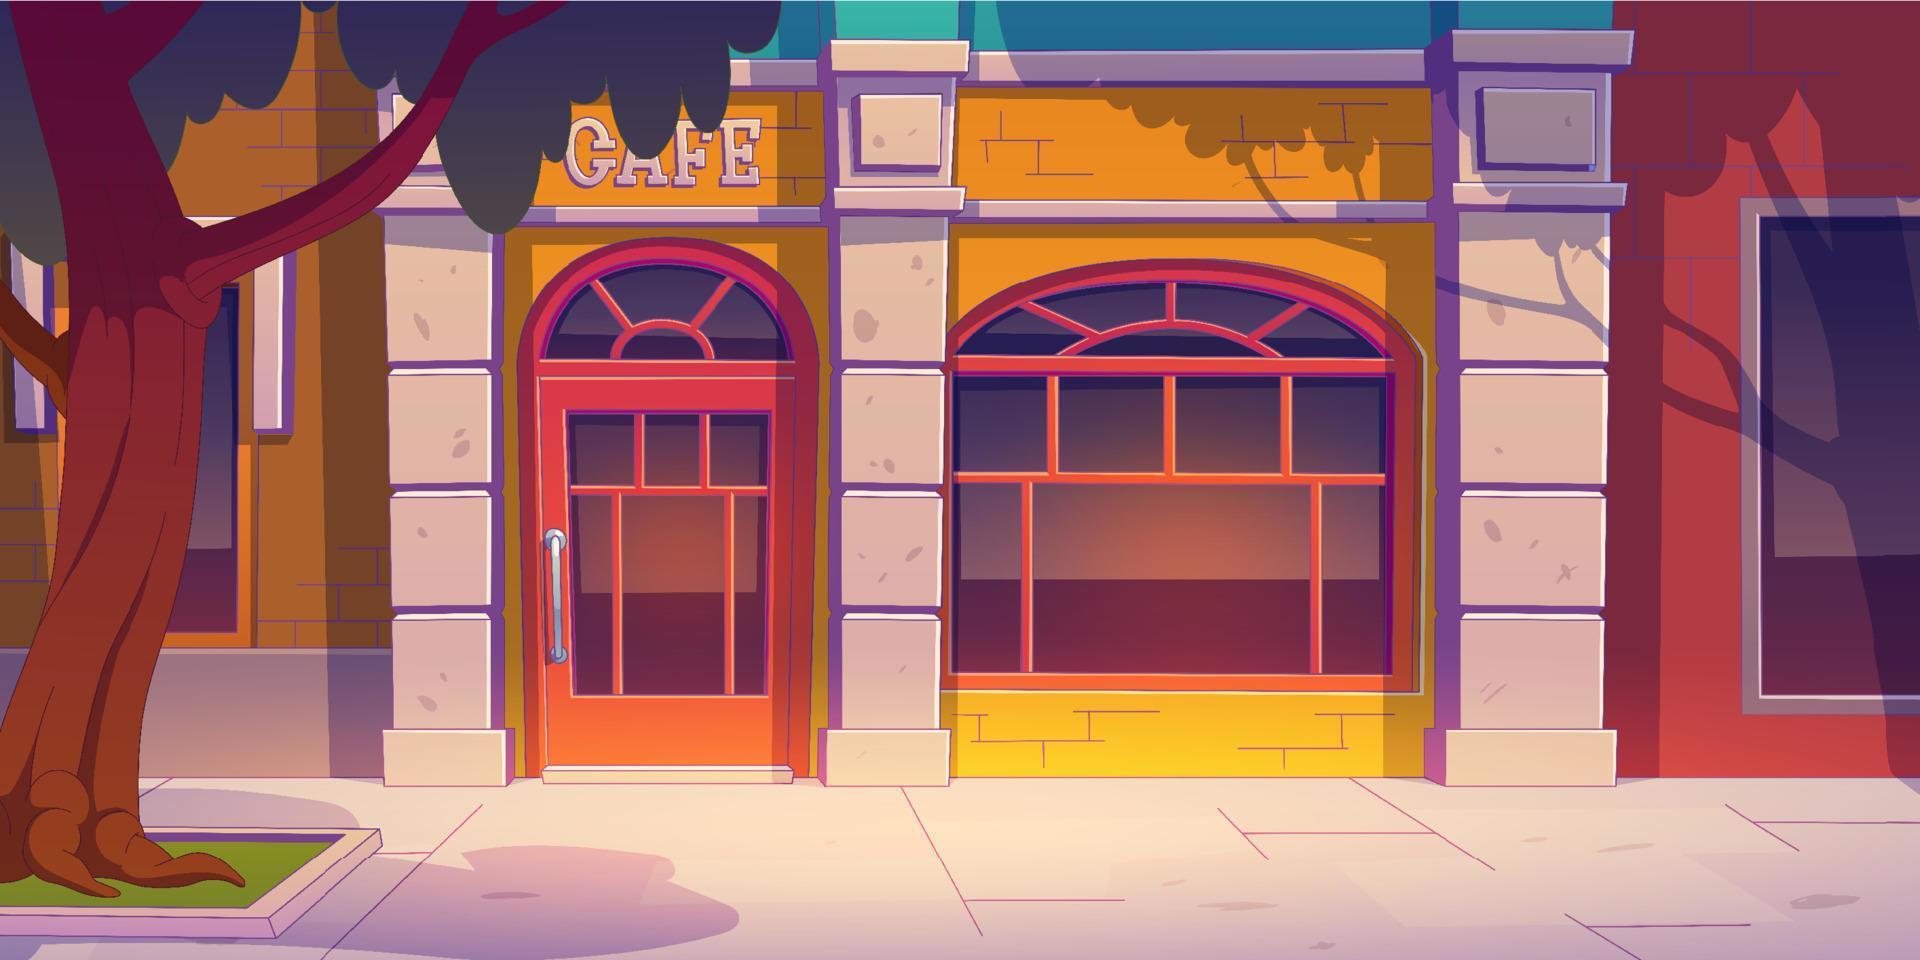 Cafe facade in city street with tree on sidewalk vector